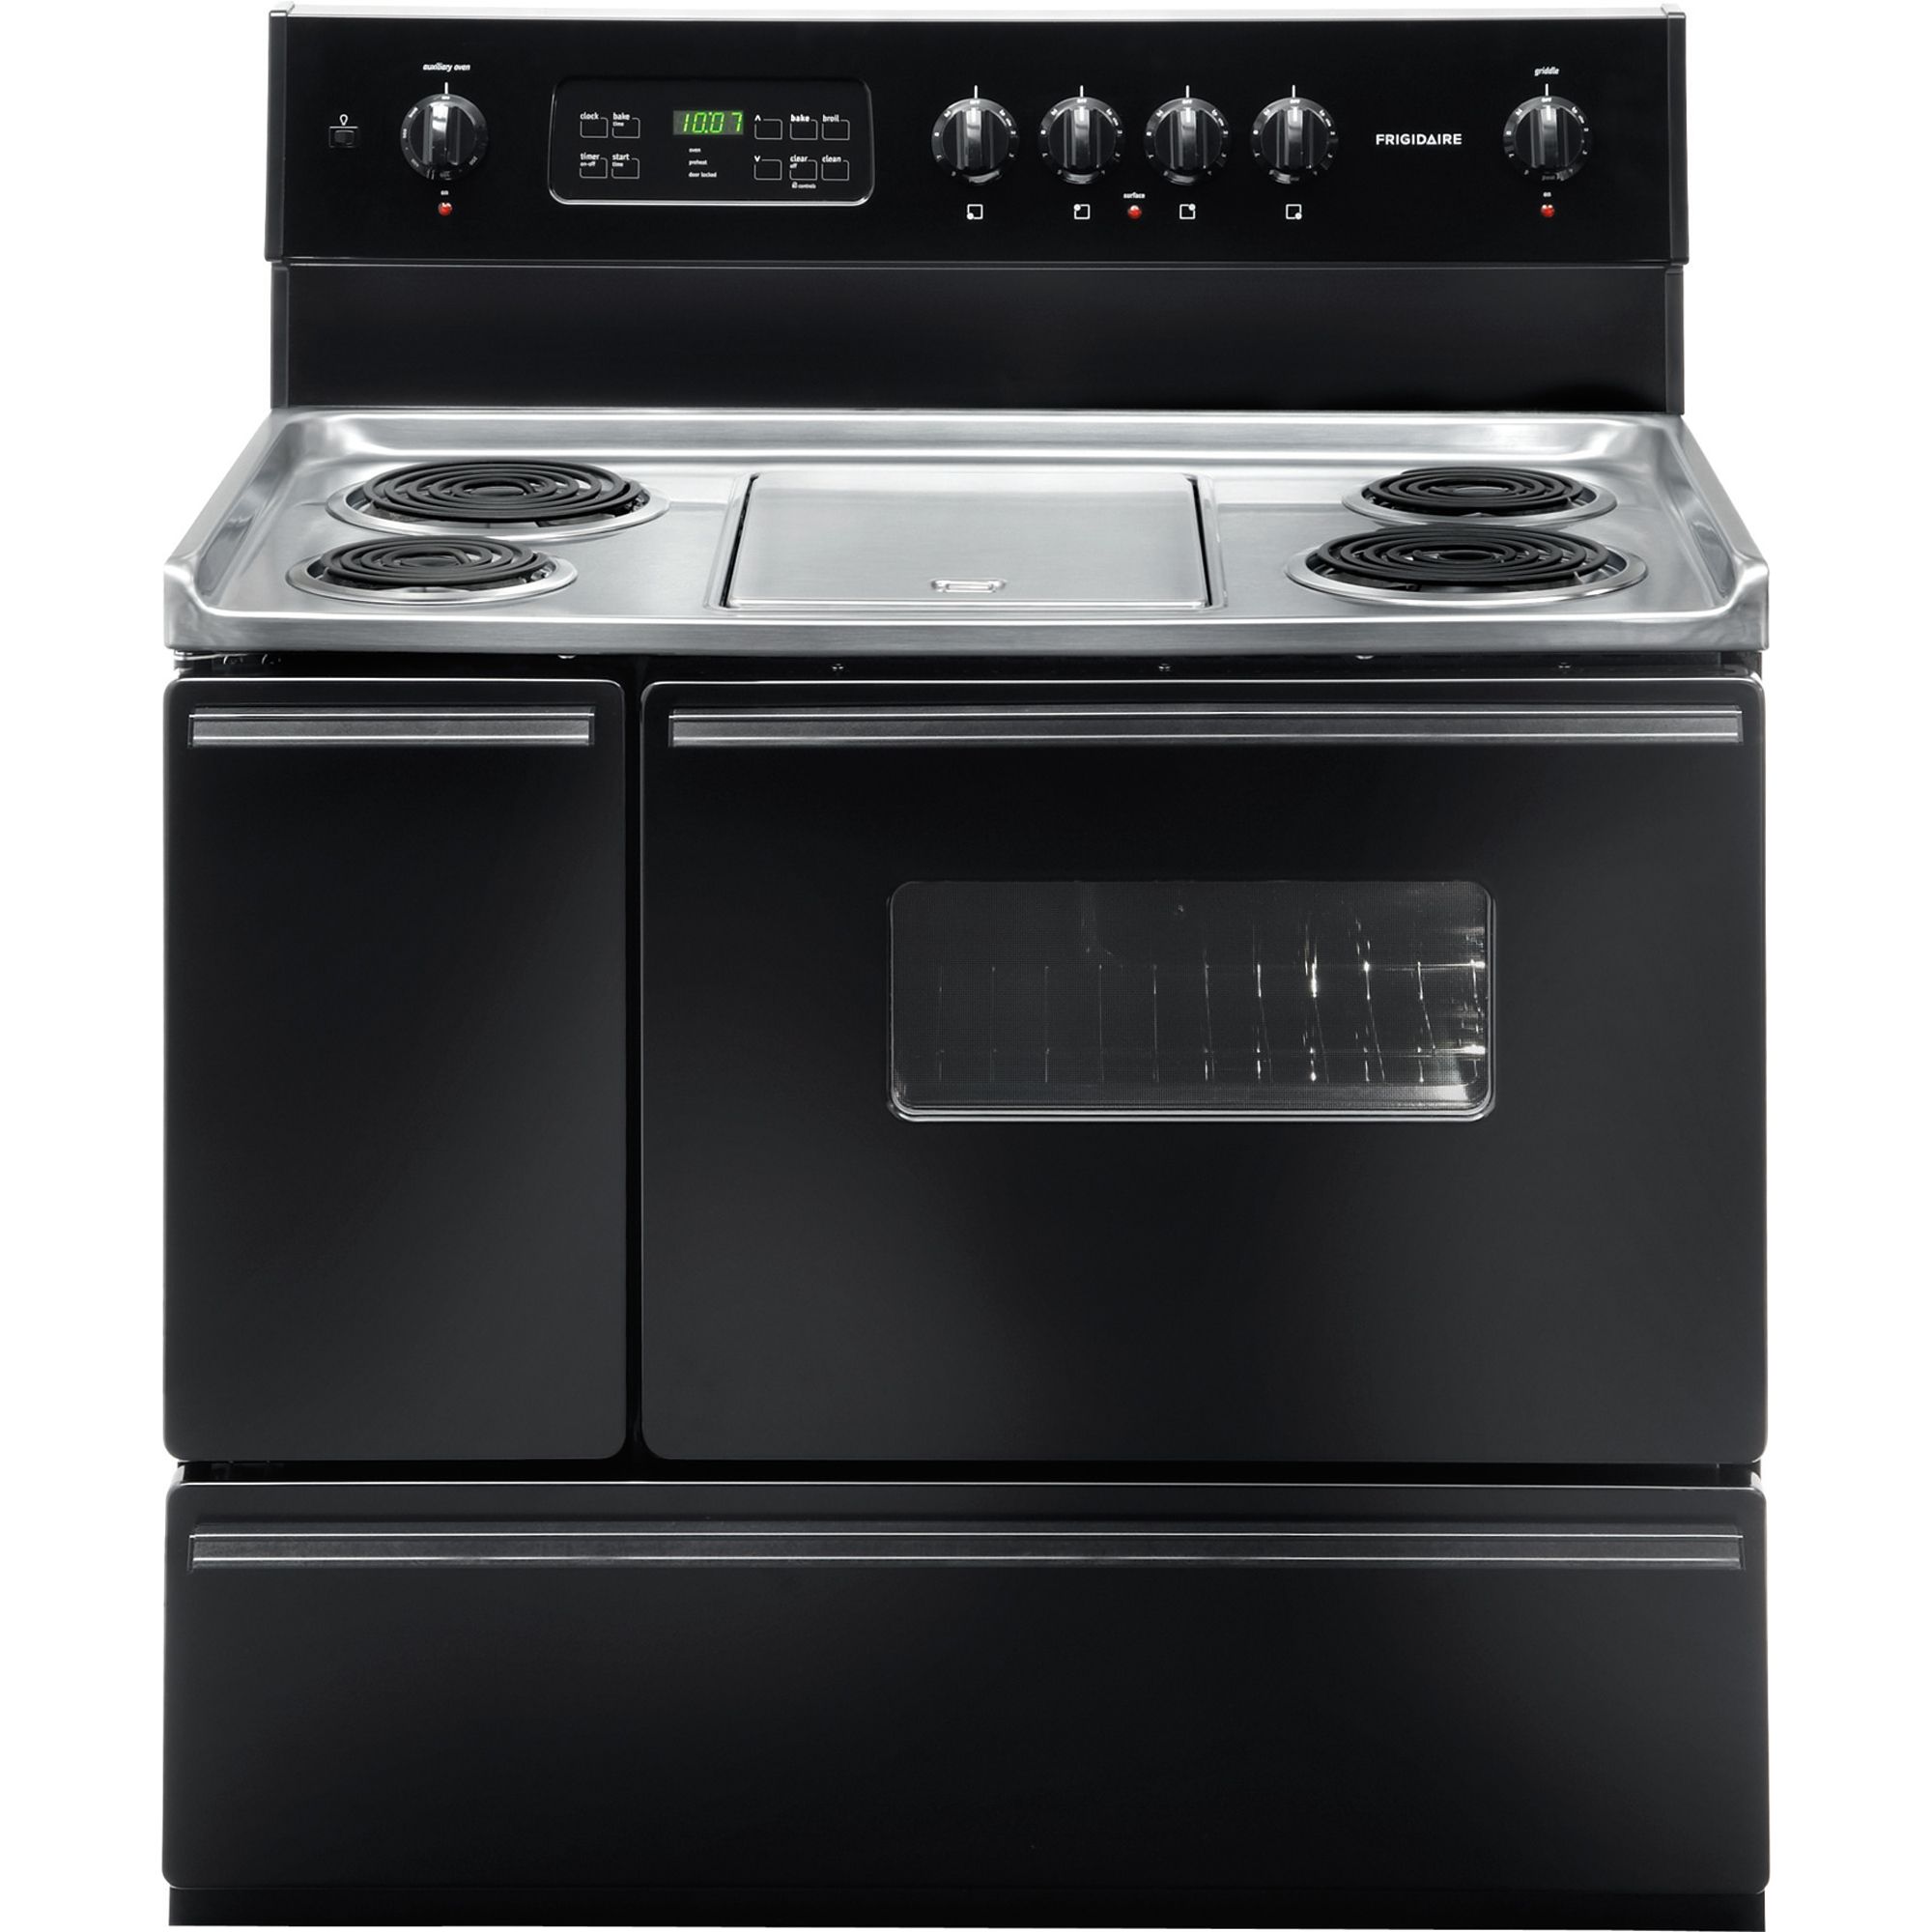 Frigidaire 40 Inch Electric Range - Get All You Need